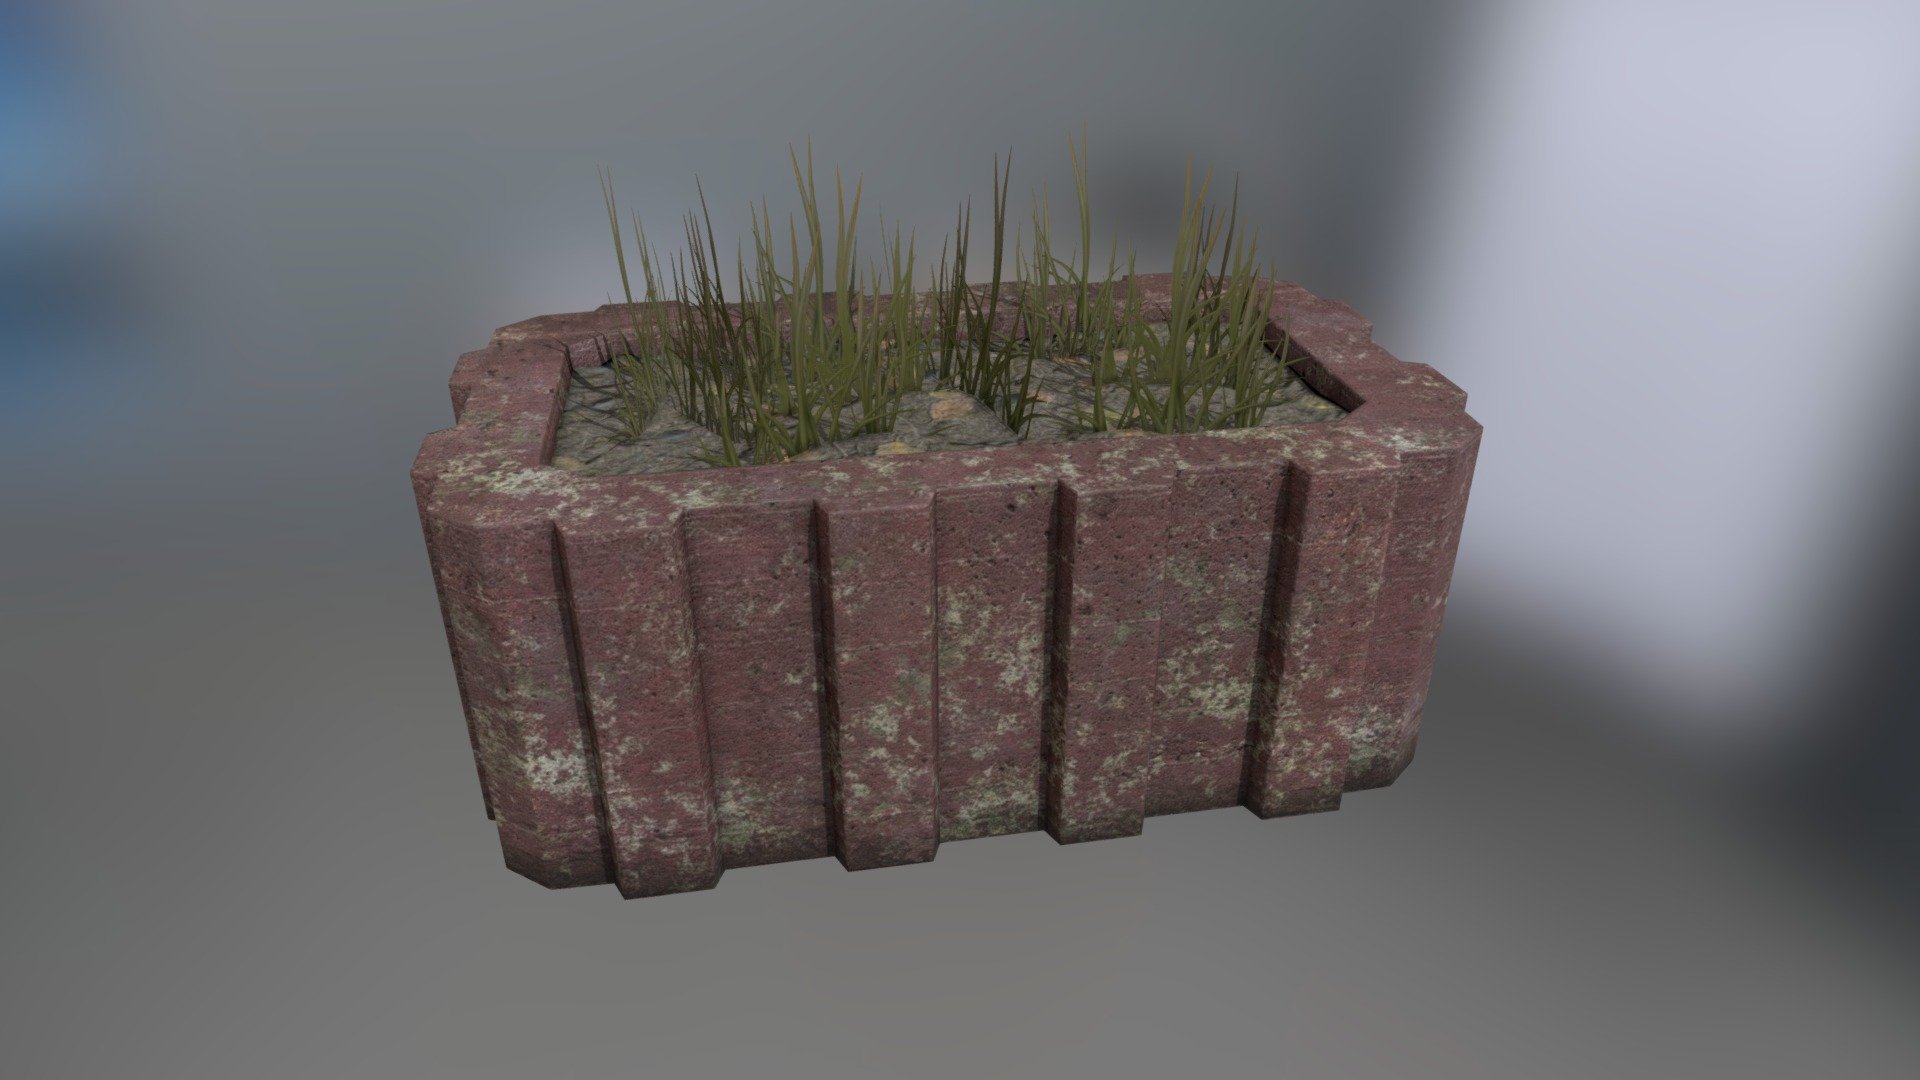 Old flower bed made of concrete. 3d model is low poly and game-ready. The grass is made on one-sided polygons, maybe some engines such as unity do not support double-sided polygons.

Real scale - Units: cm ~ 63,2 x 36,2 x 40,6 cm.

Formats:




.blend (Mesh + material (Principled BSDF) + Textures PBR - Roughness/Metallic) - Blender (ver. 2.91.0).

.max (Mesh + material (Vray 3.60.03) + Textures Specular/Glossiness) - 3ds Max 2018.

.tbscene (Mesh + Textures PBR) - Marmoset Toolbag 3 (Ver 3.08).

.FBX (only mesh without materials)

.obj (Triangulated, only mesh without materials)

.glb (Triangulated, Mesh + Textures PBR (compressed in format))

.gltf ( Triangulated, Mesh + Textures PBR - .jpg )

.spp (Substance Painter Project ver. 2020)

.zip (folder textures, PBR Roughness/Metallic)

.zip (folder textures, PBR Specular/Glossiness)

.zip (folder textures, textures baked from a high poly model)
 - Flowerbed - 3D model by Grishmanovskij Anton (@GrishmanovskijAnton) 3d model